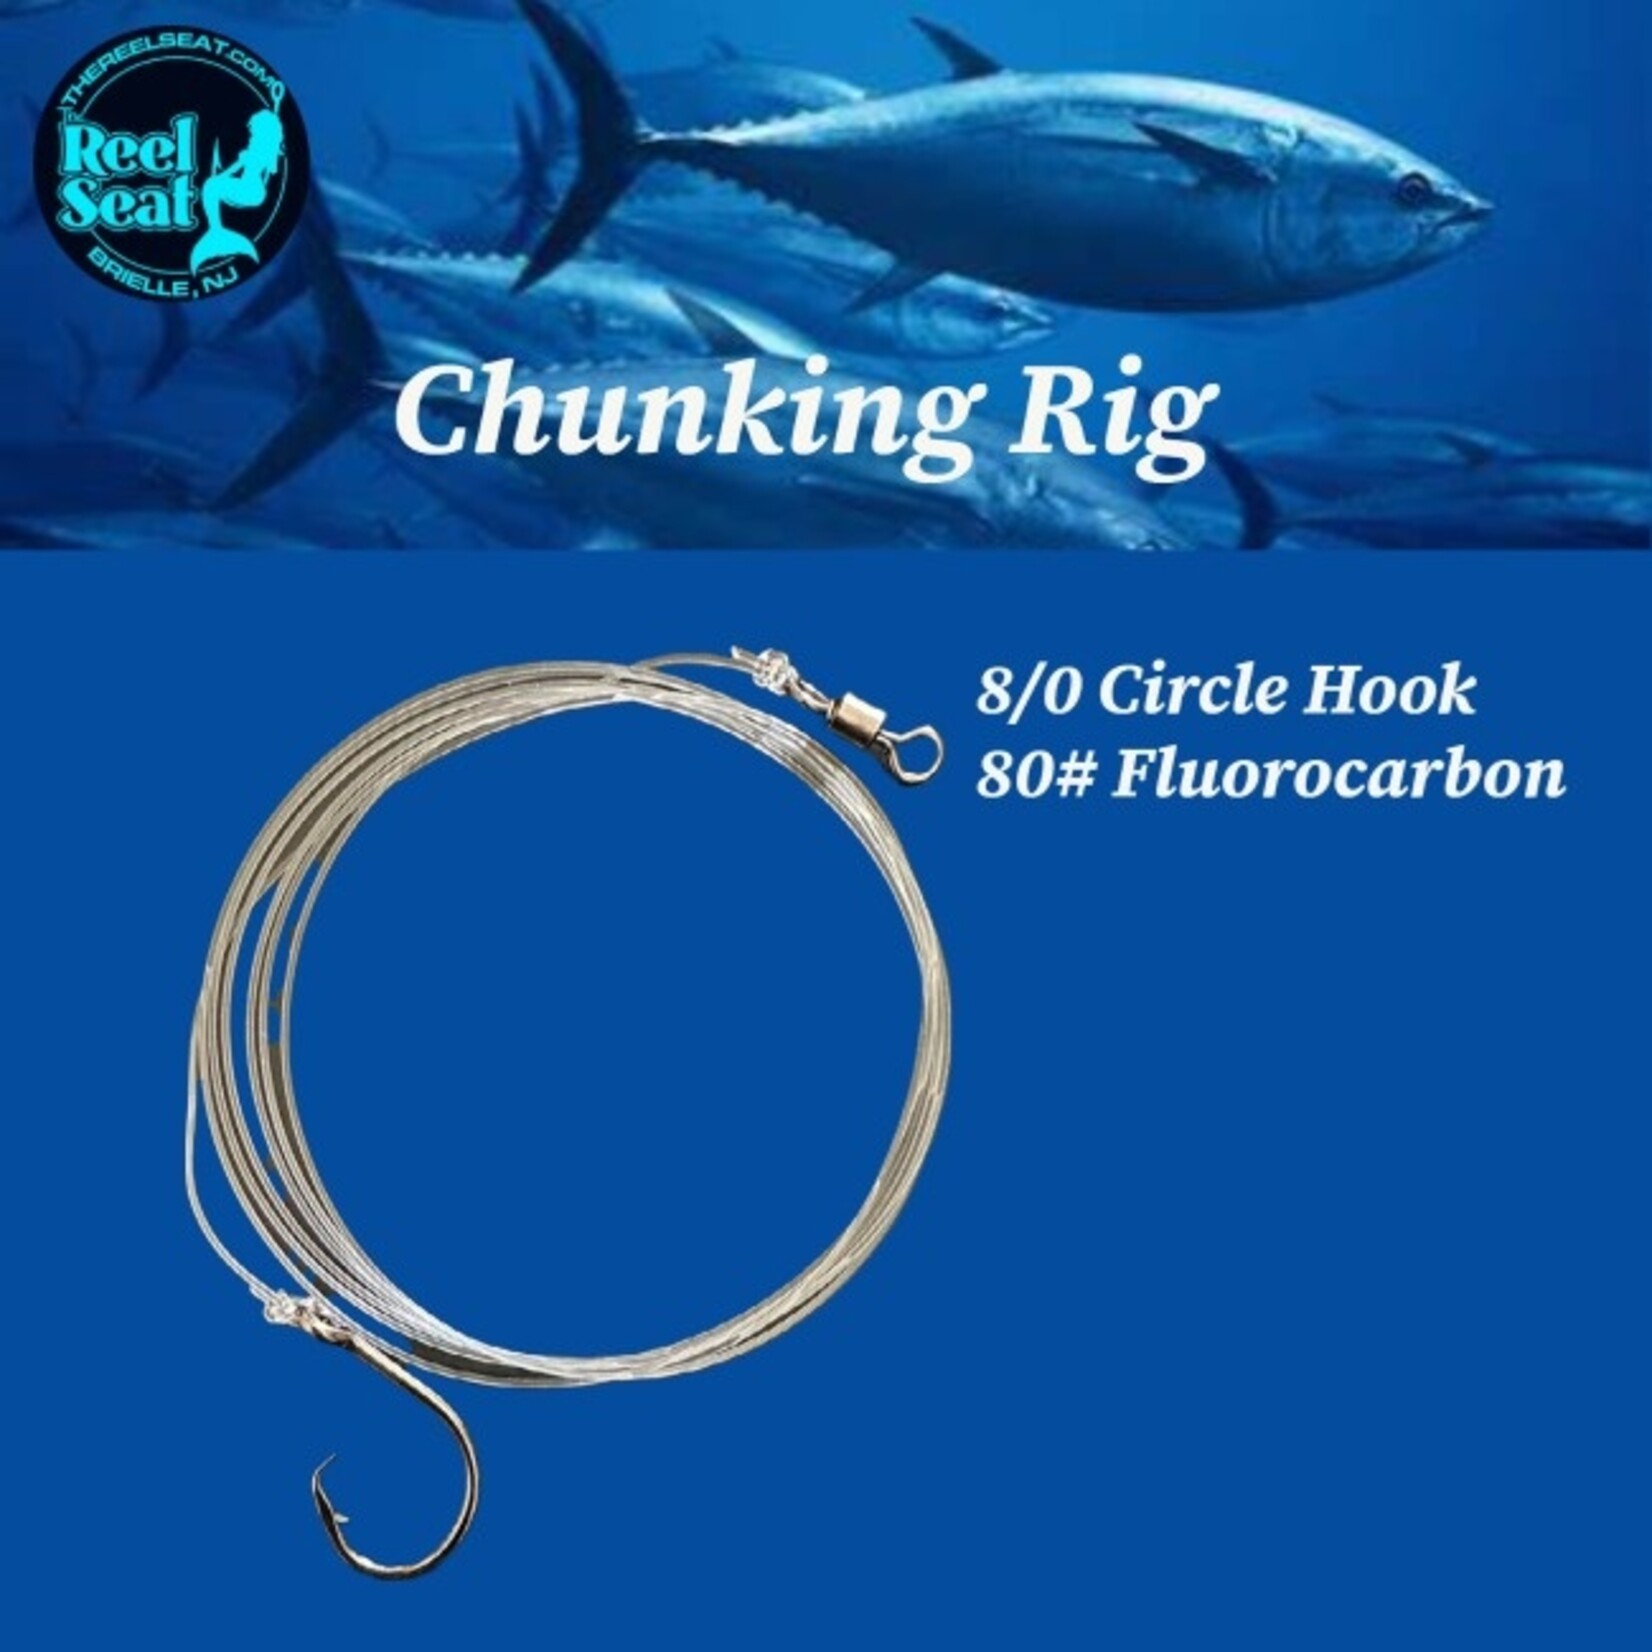 The Reel Seat rs chunking rig 8/0 circle hook on 80lbs fluoro